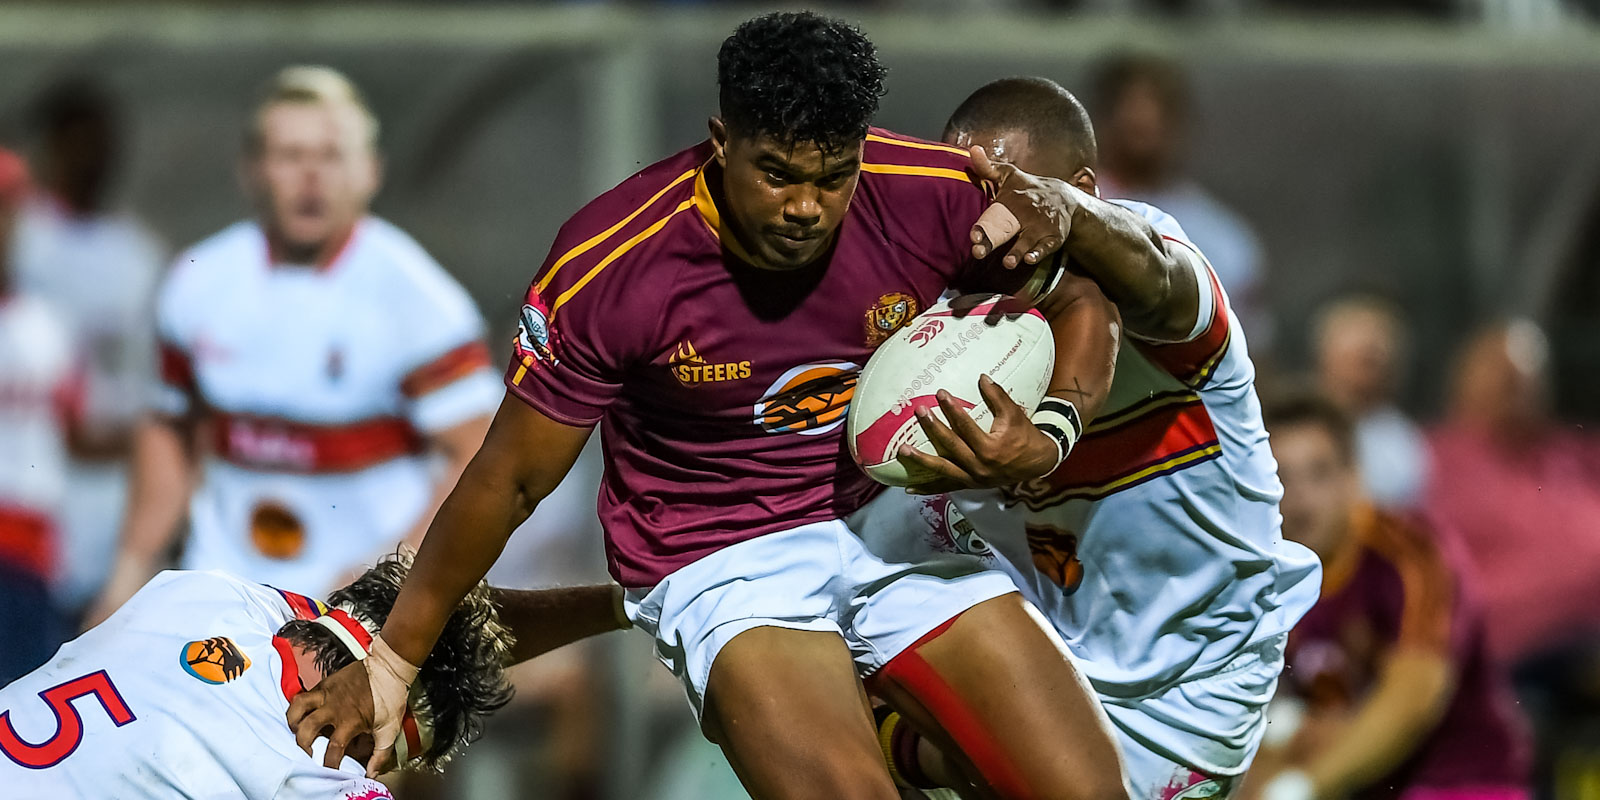 Duncan Saal in action for FNB Maties in the FNB Varsity Cup